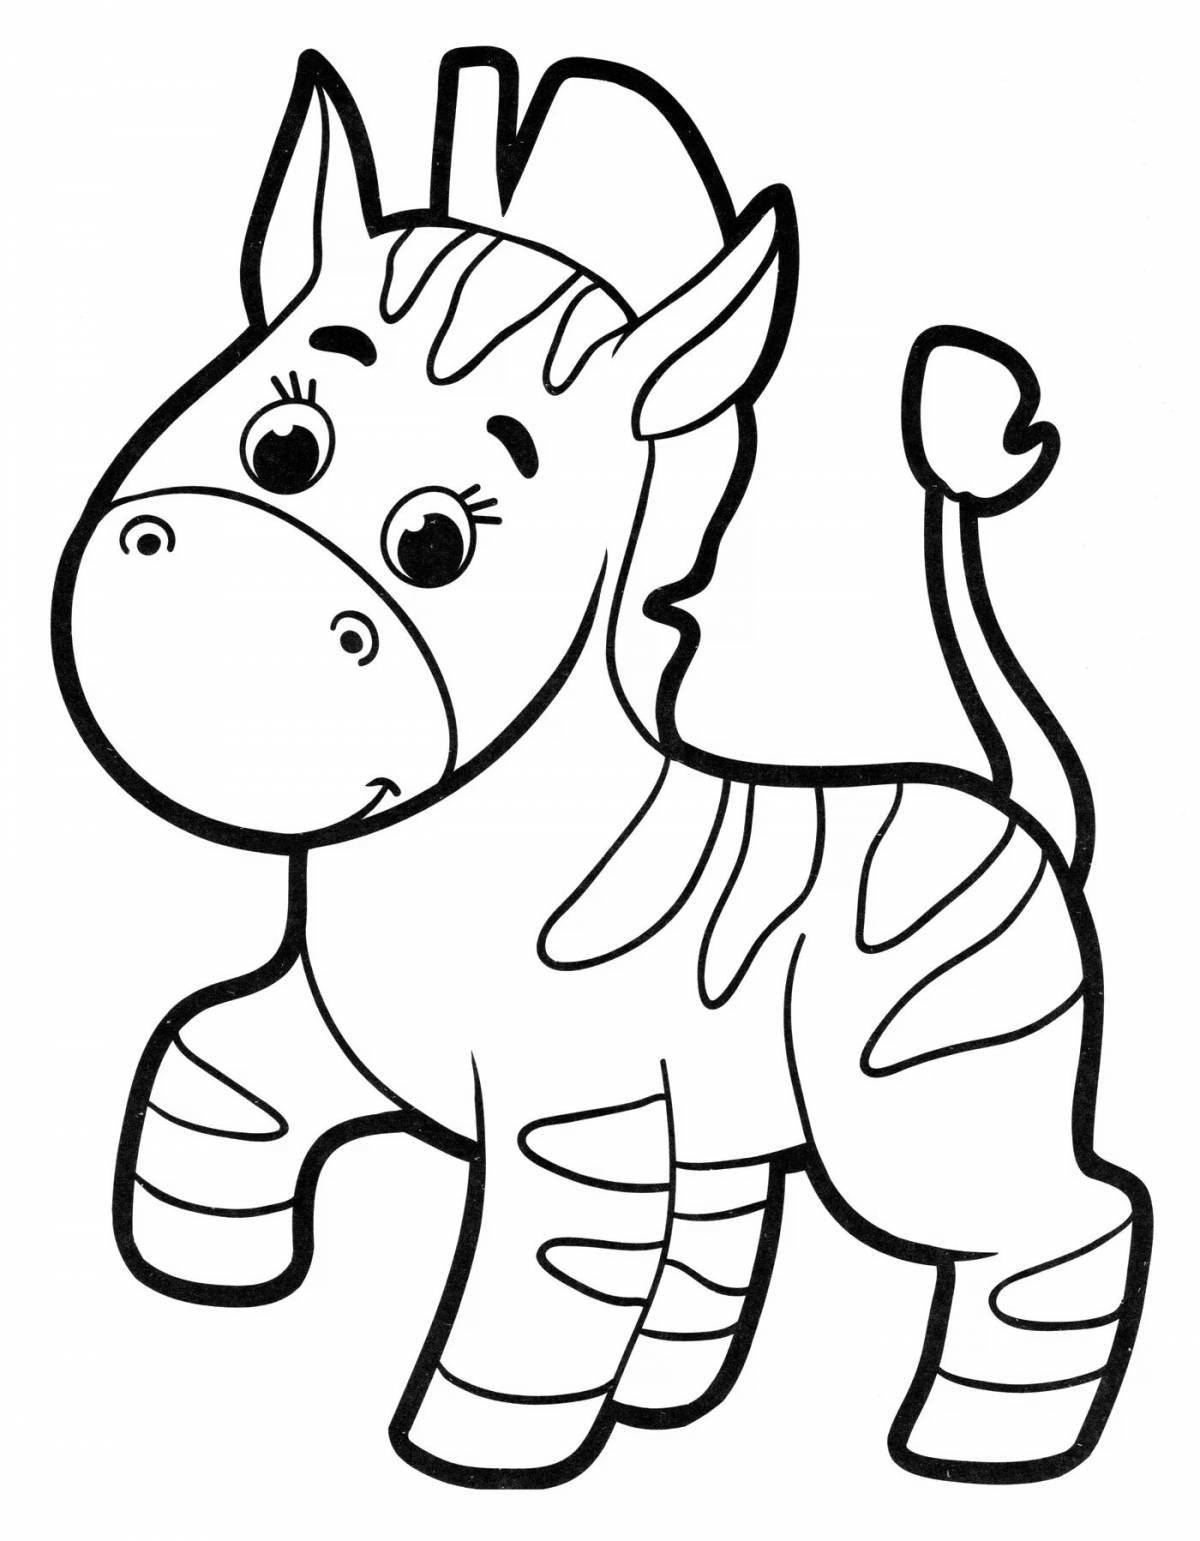 Colorful zebra coloring page for 3-4 year olds